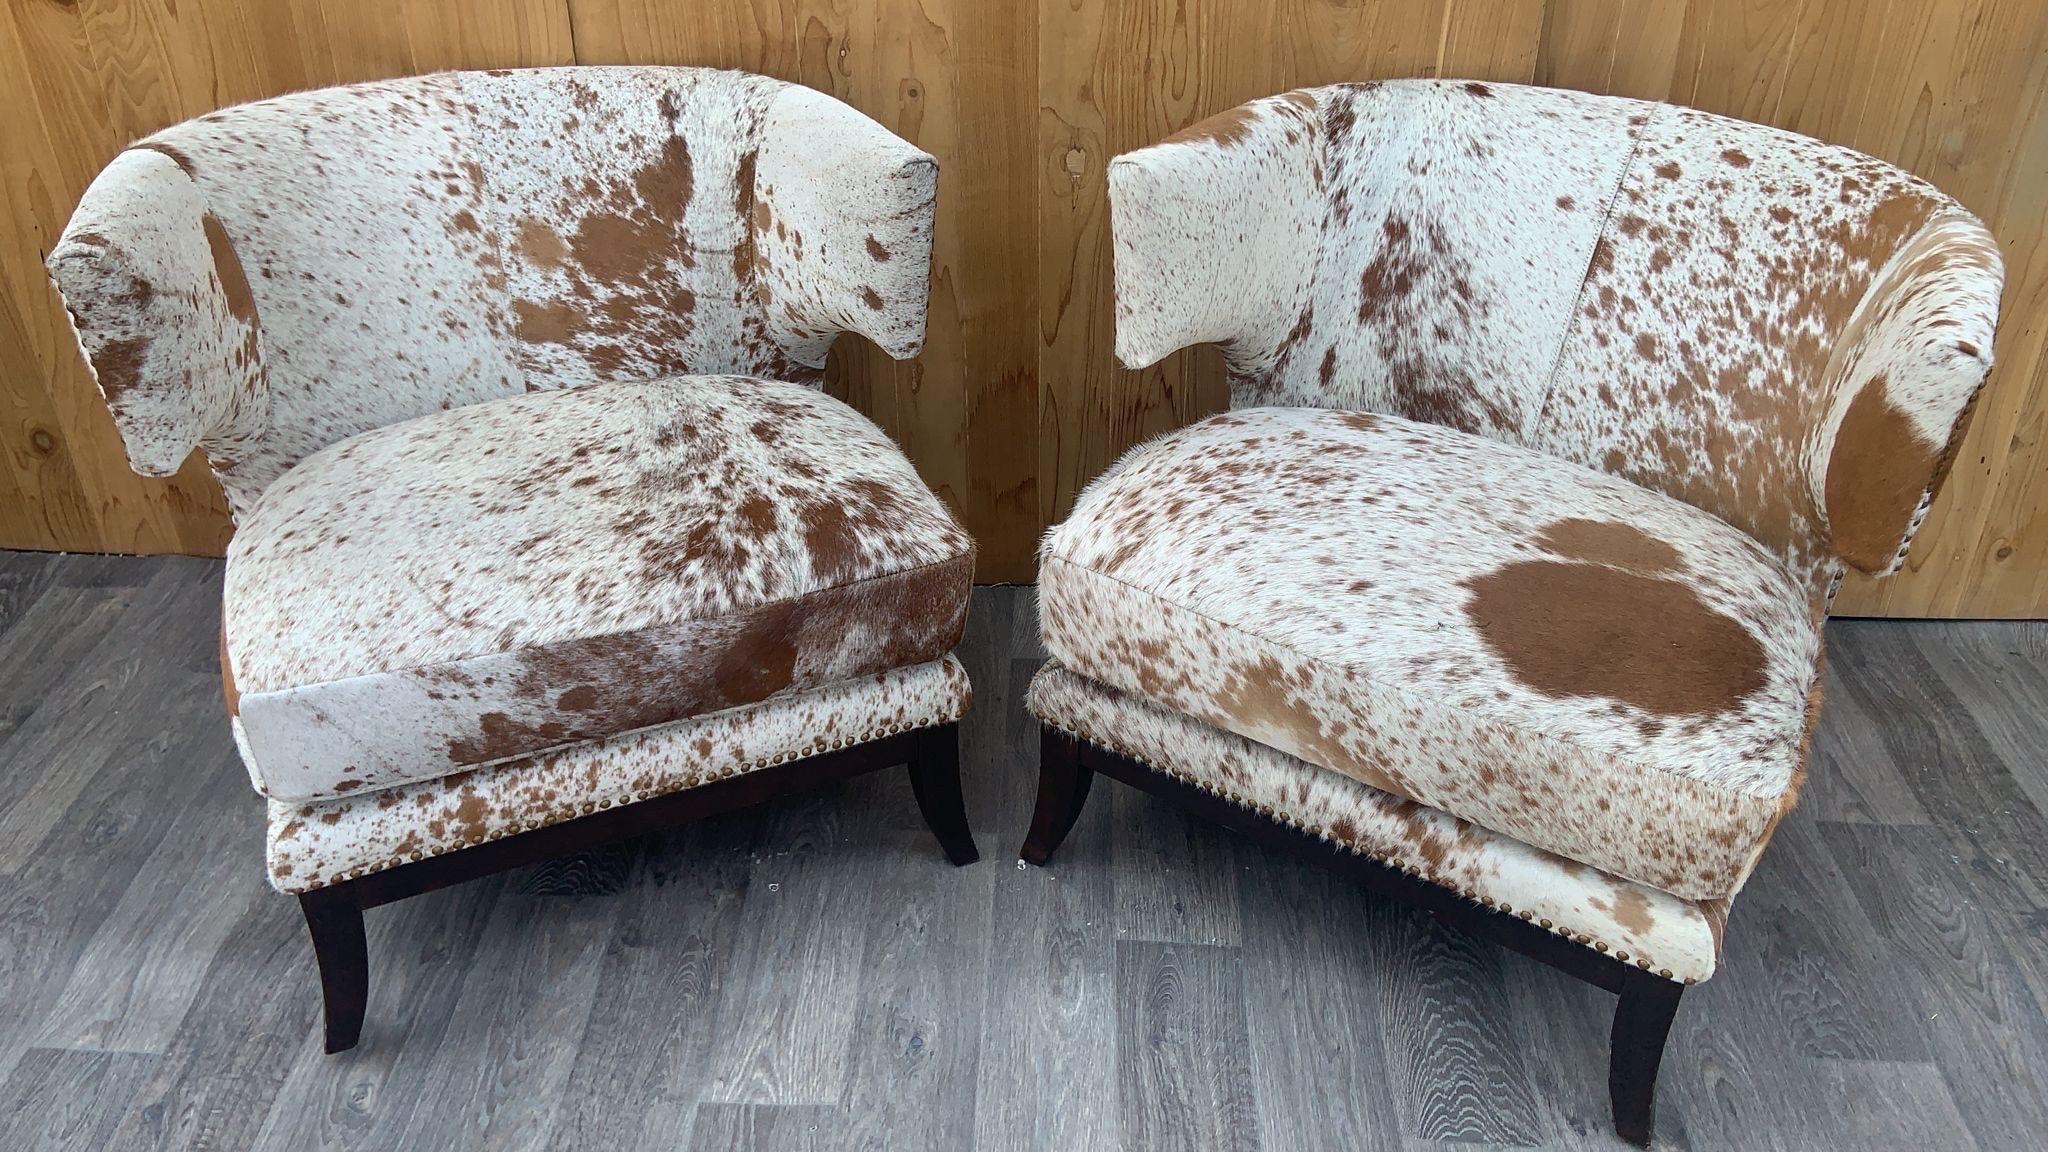 Mid-Century Modern English Horseshoe Savoy Chairs Newly Upholstered in Brazilian Cowhide - Set of 2